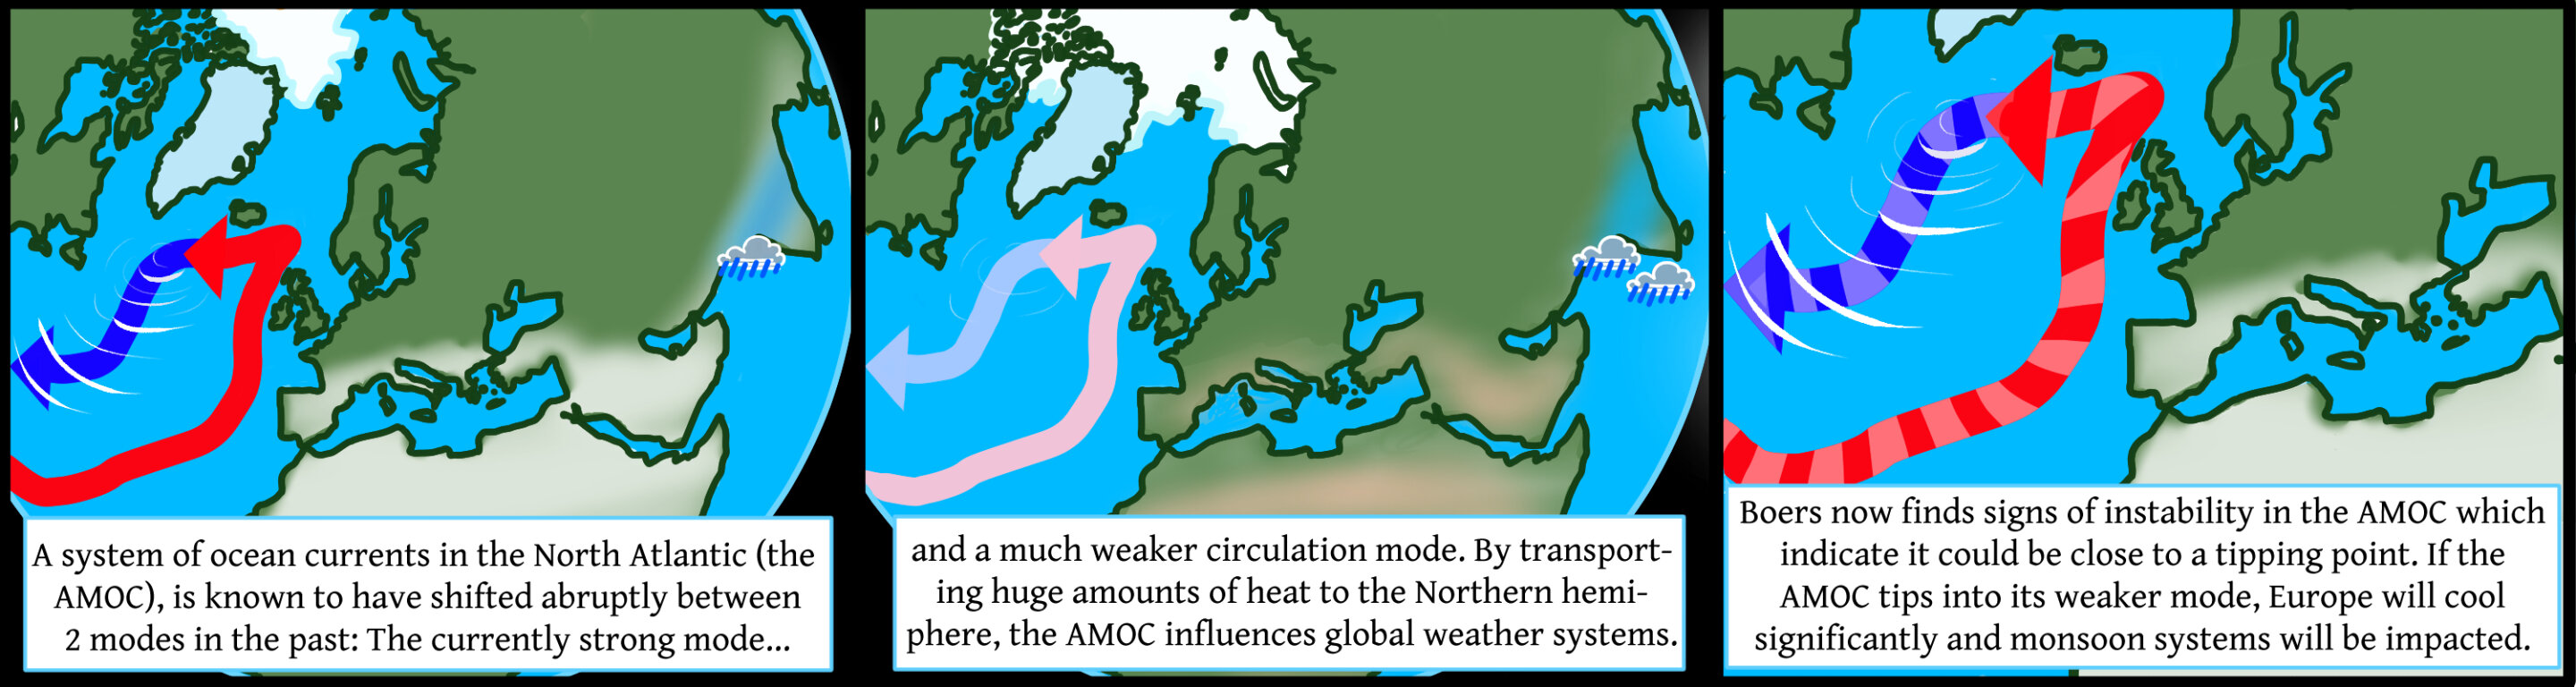 Major Atlantic ocean current system might be approaching critical threshold - The Archaeology